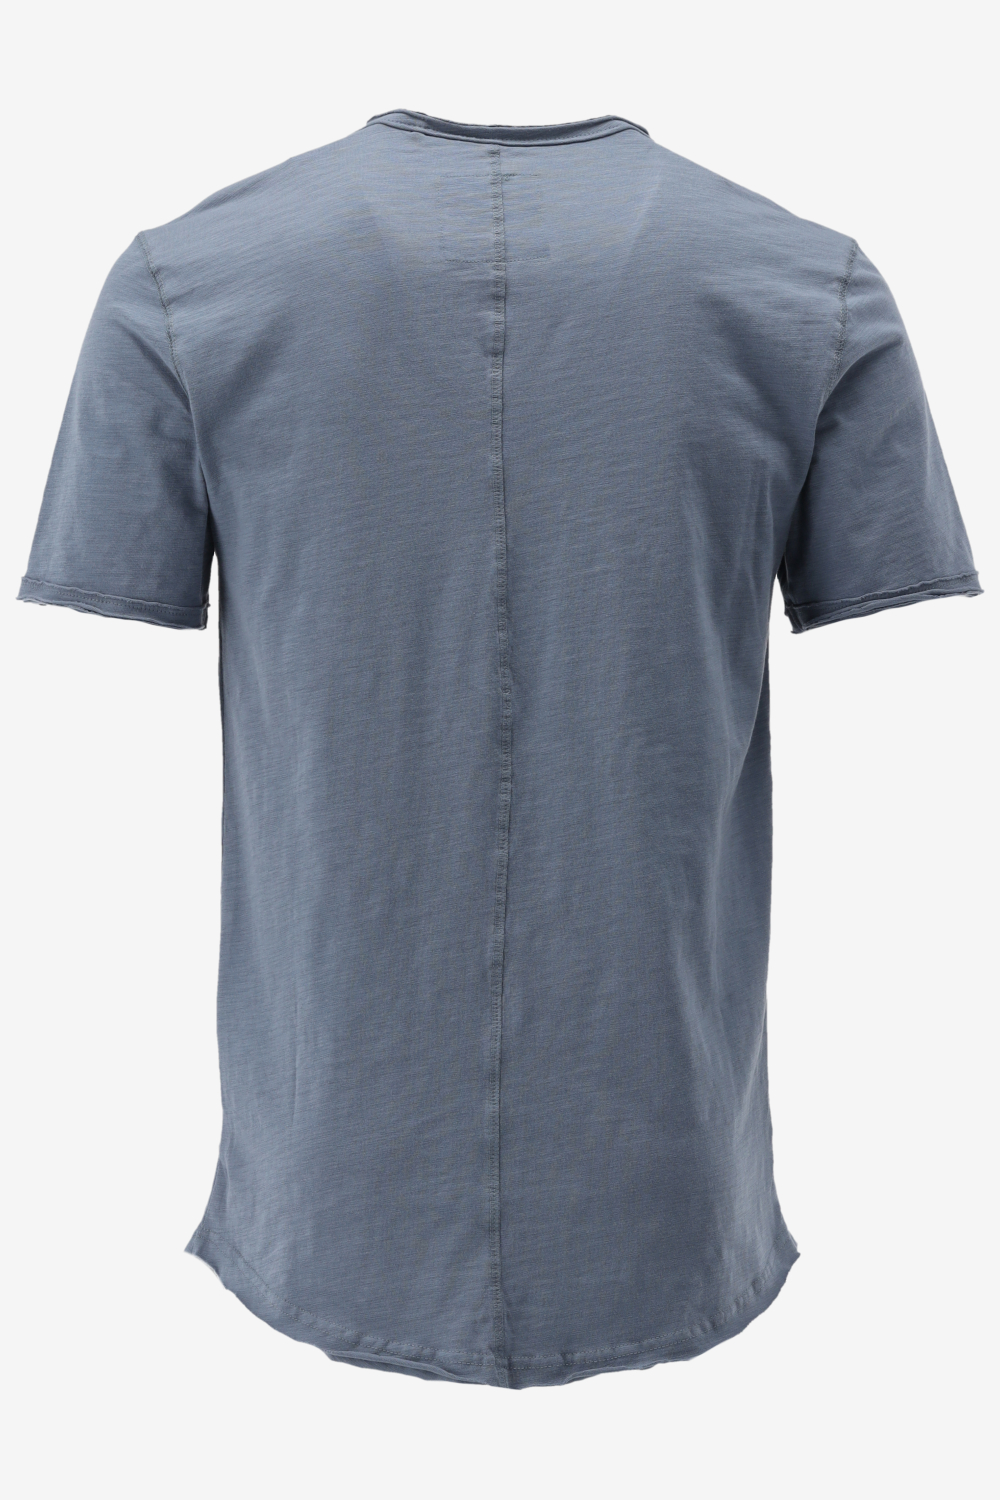 Only & Sons T-shirt BENNE LONGY 